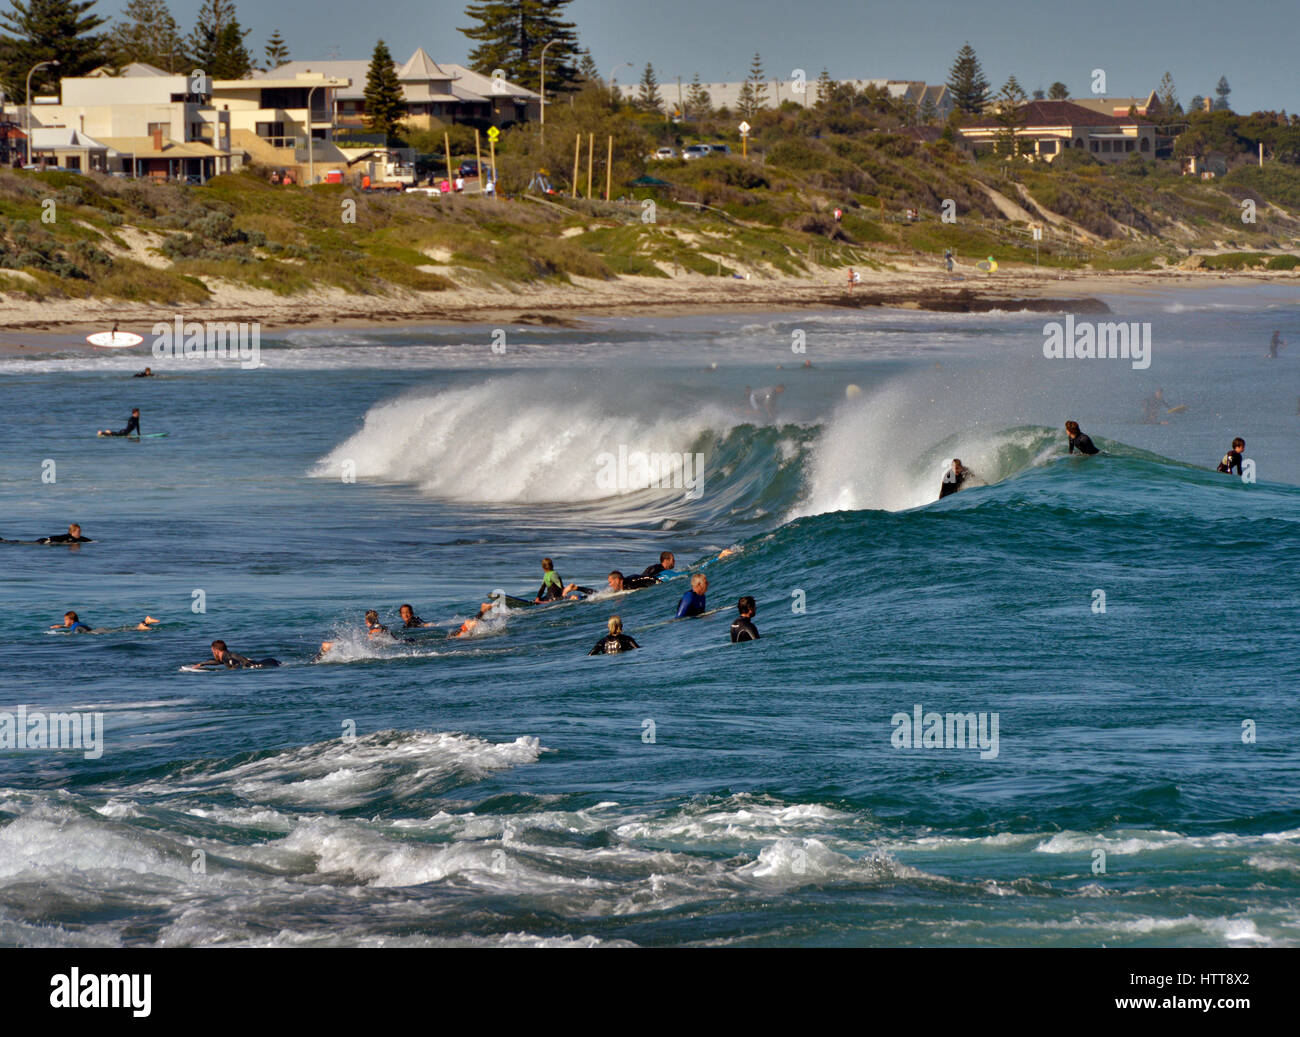 Surfers in the waves at Cottesloe Beach in Western Australia Stock Photo